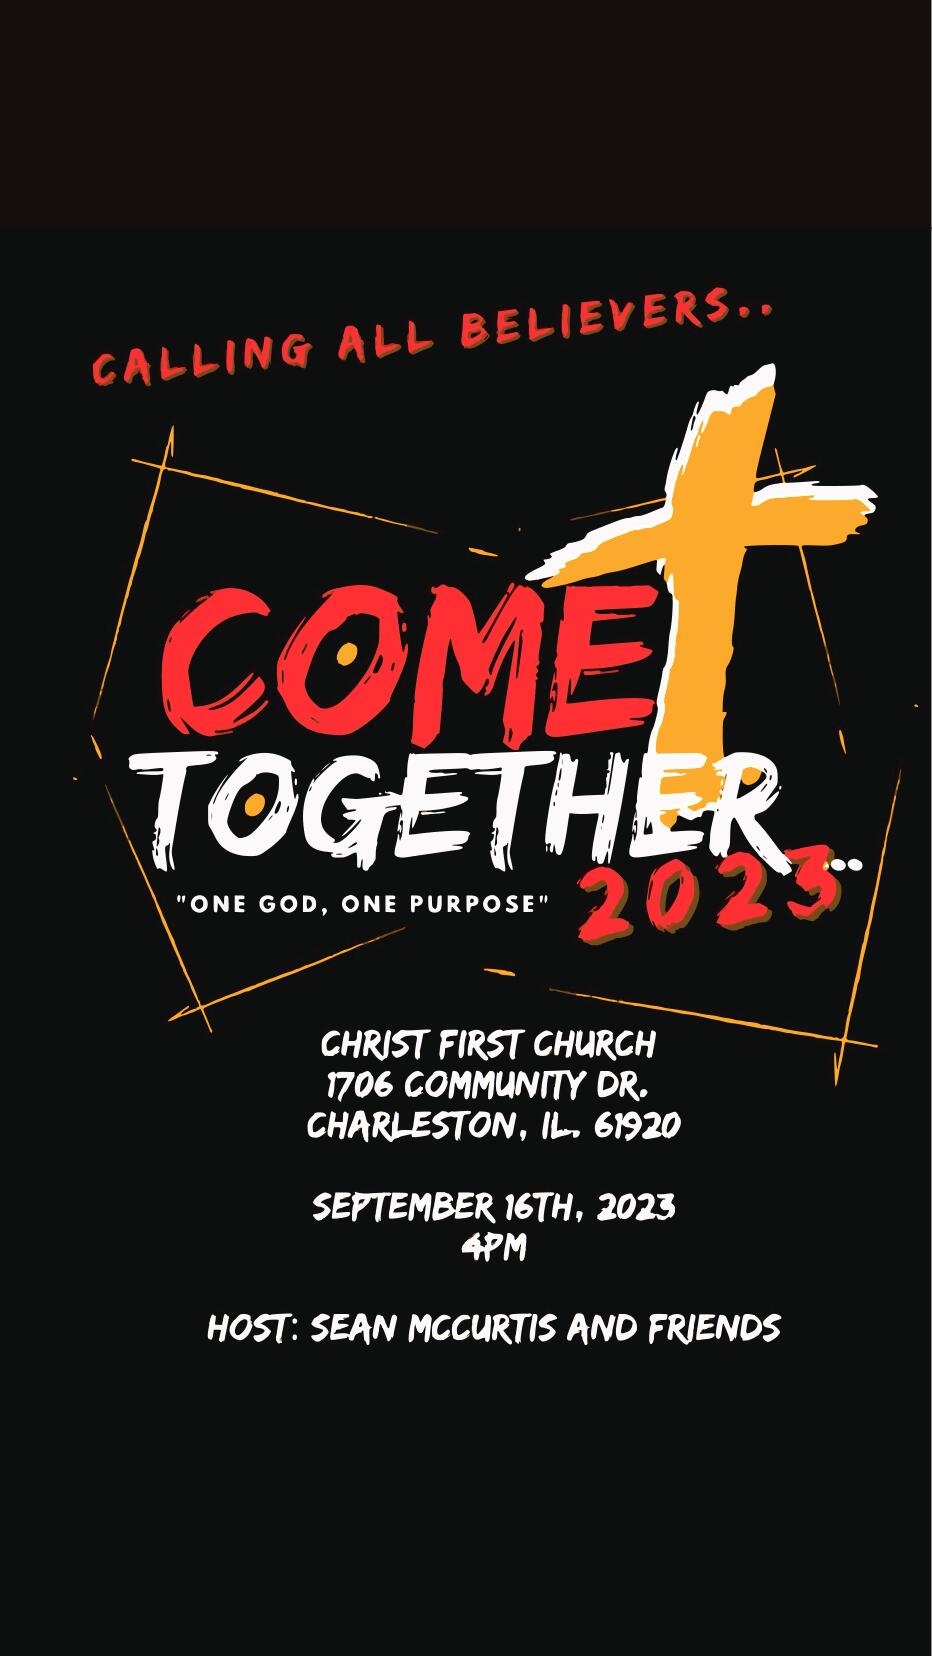 Come Together 2023 (1) image